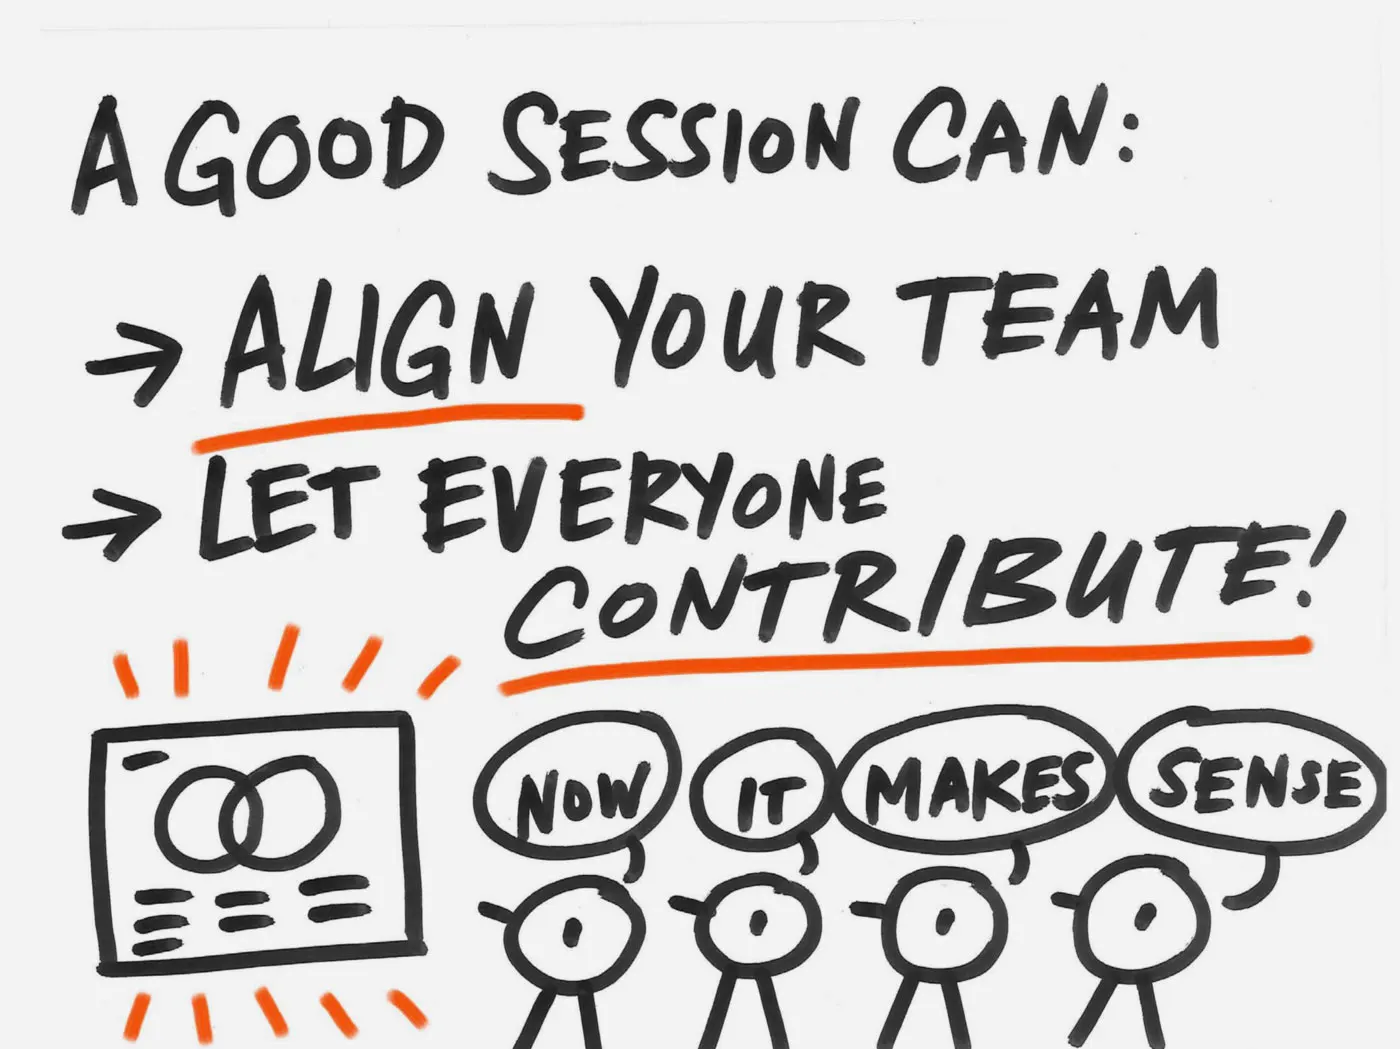 "A good session can: Align your team. Let everyone contribute. written above four stick figures each with a single-word speech bubble: Now. It. Makes. Sense." written in black marker.